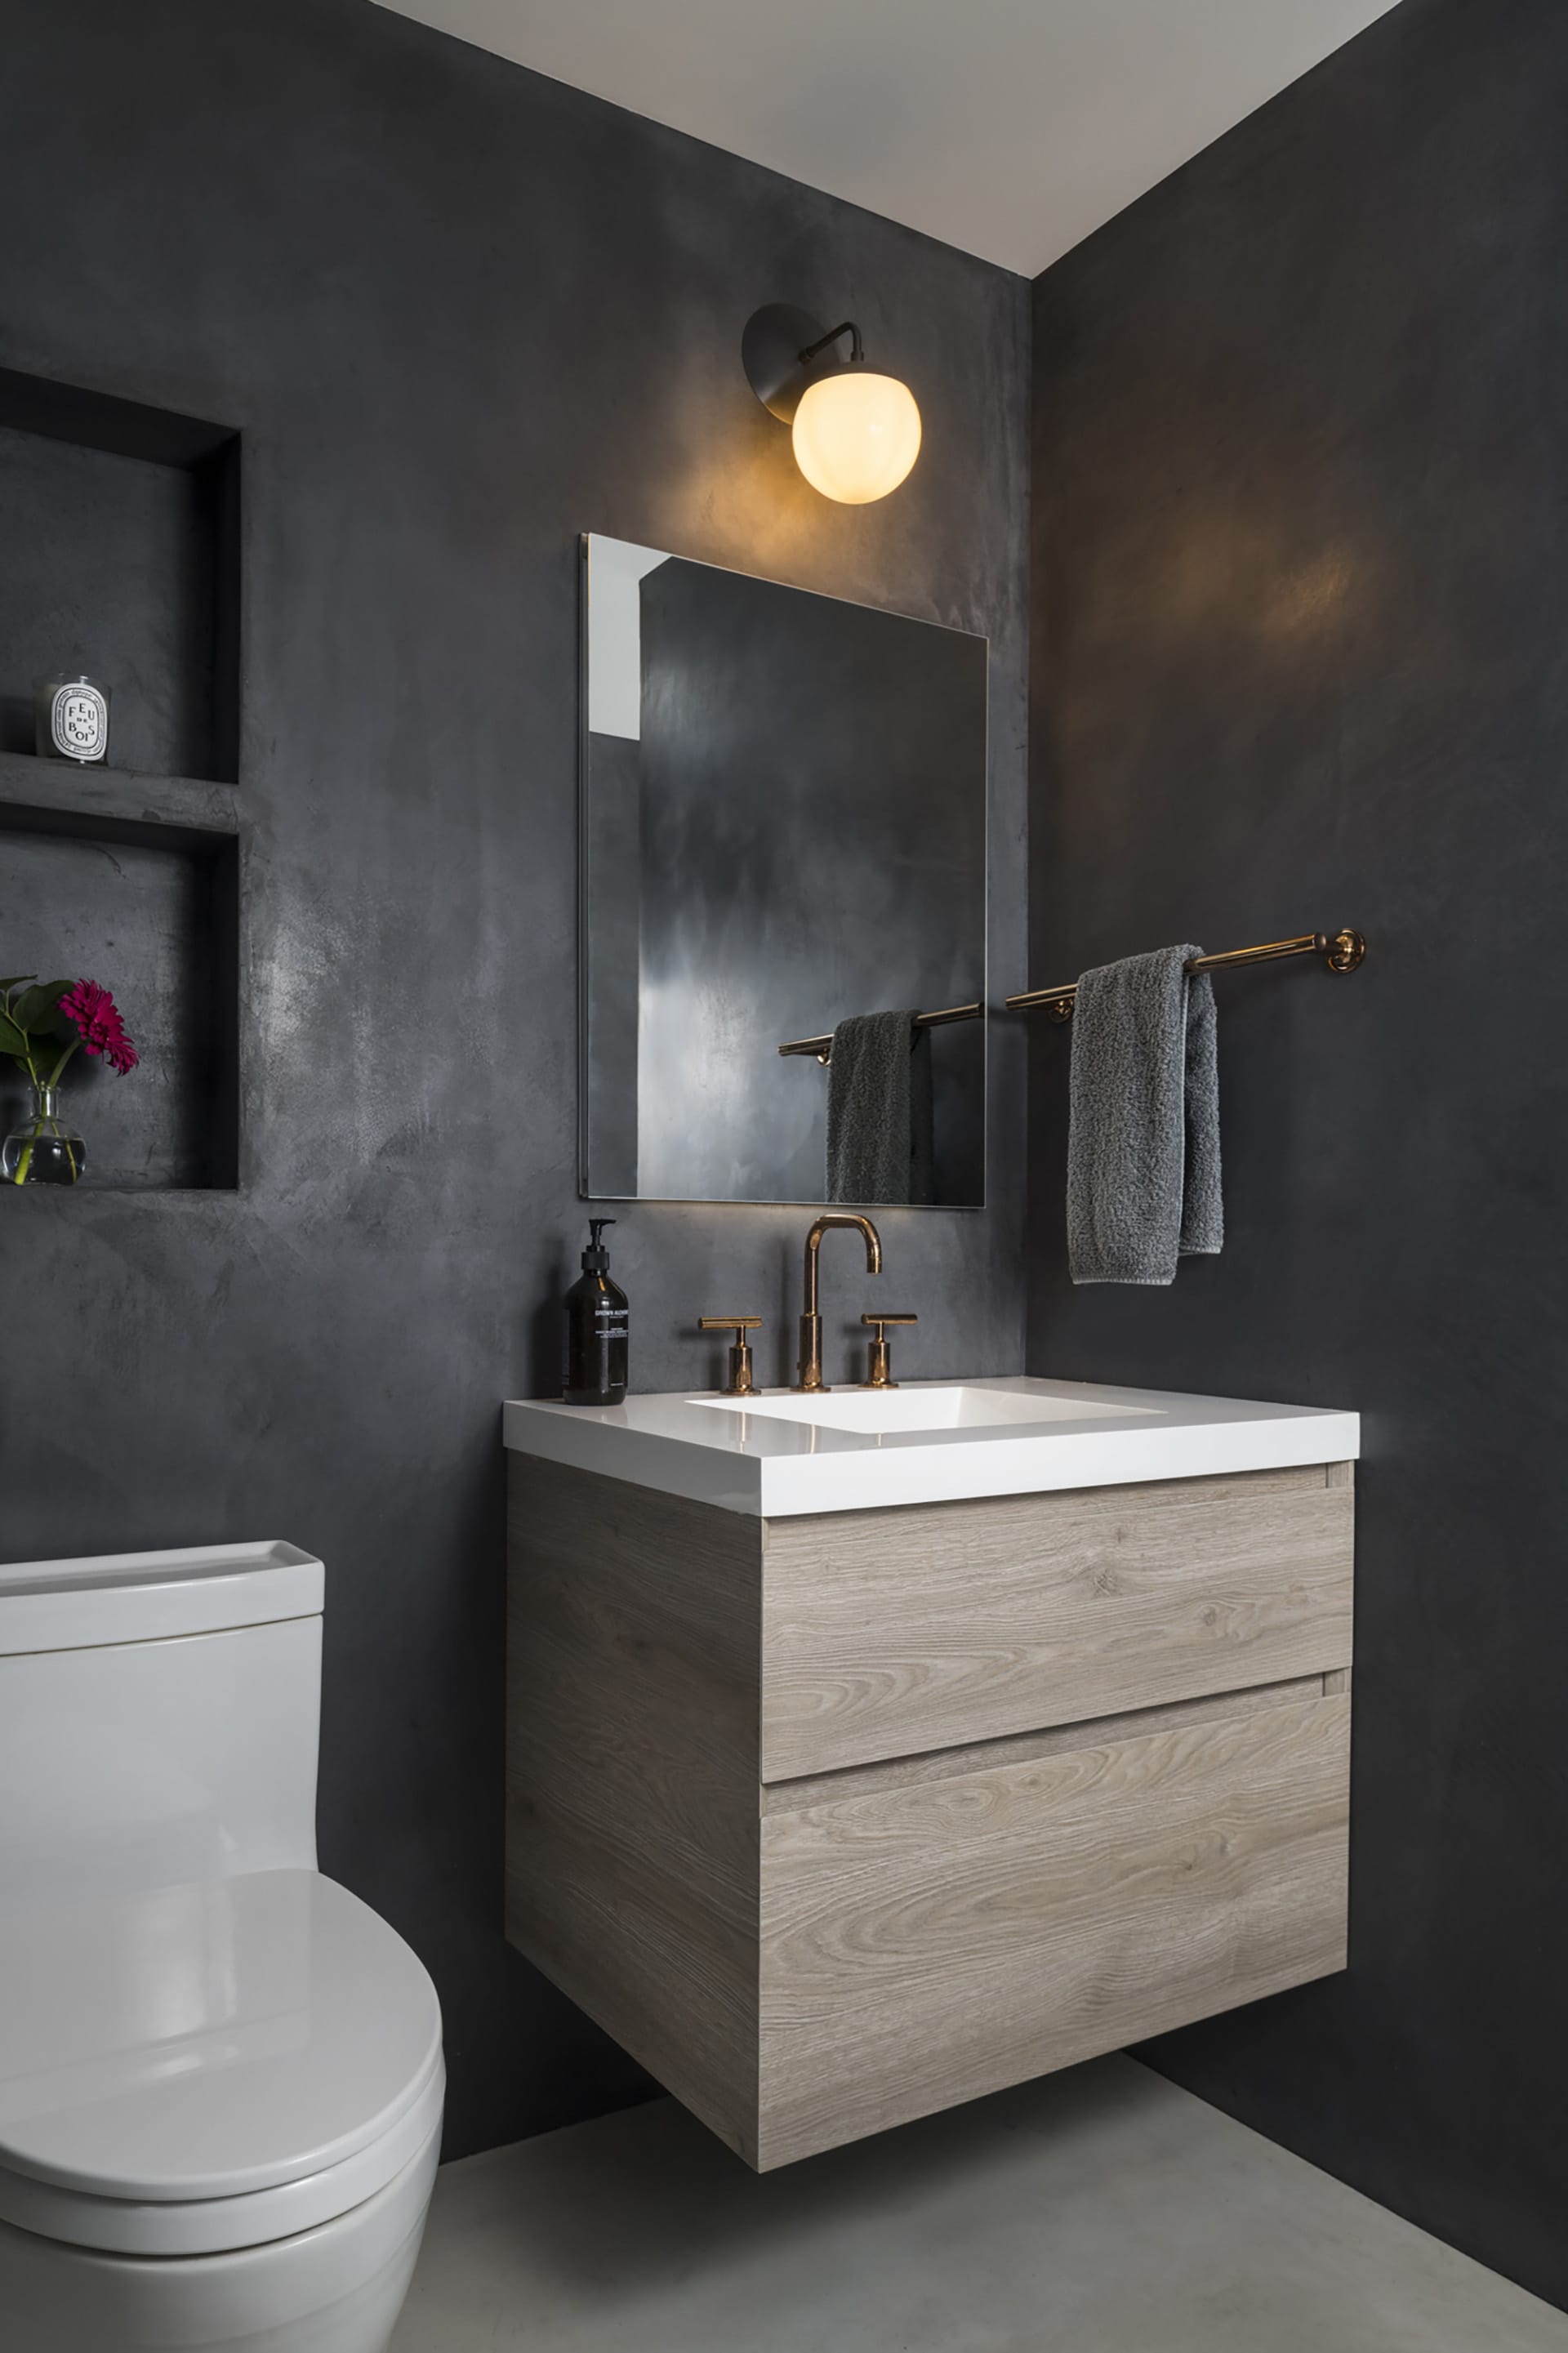 Guest bathroom with a wood vanity and dark grey Cementous walls